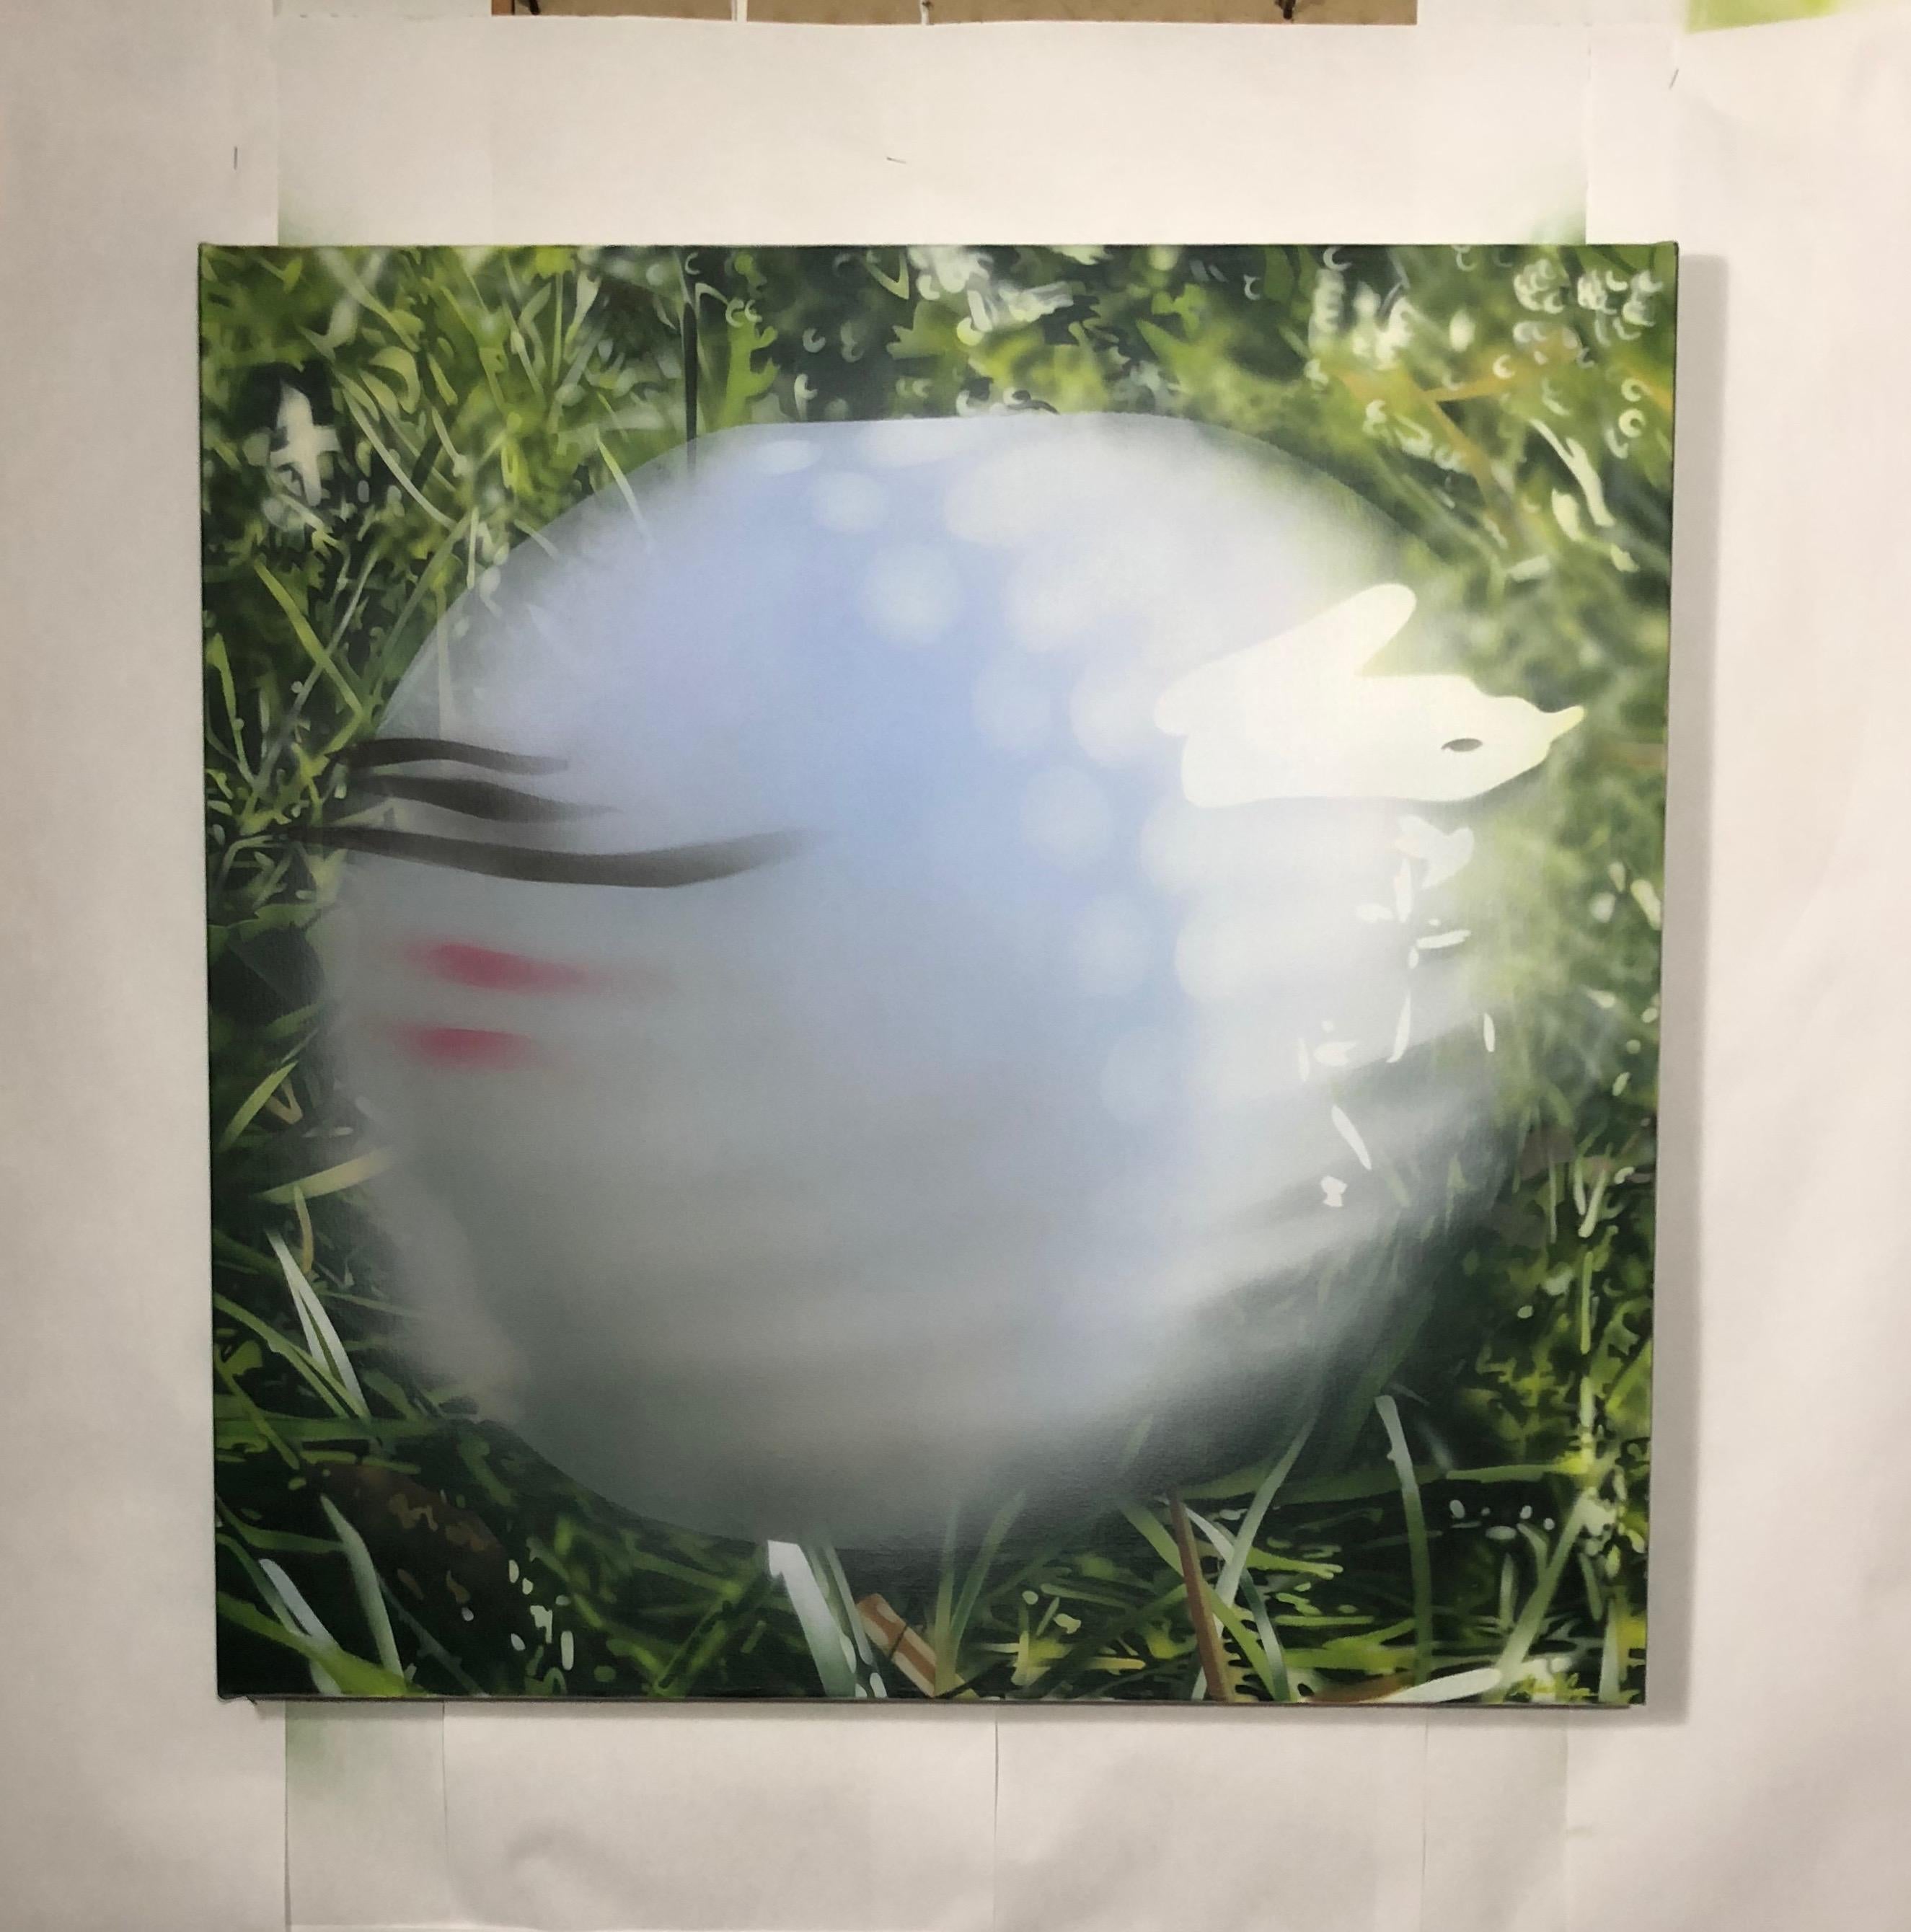 how to paint a golf ball